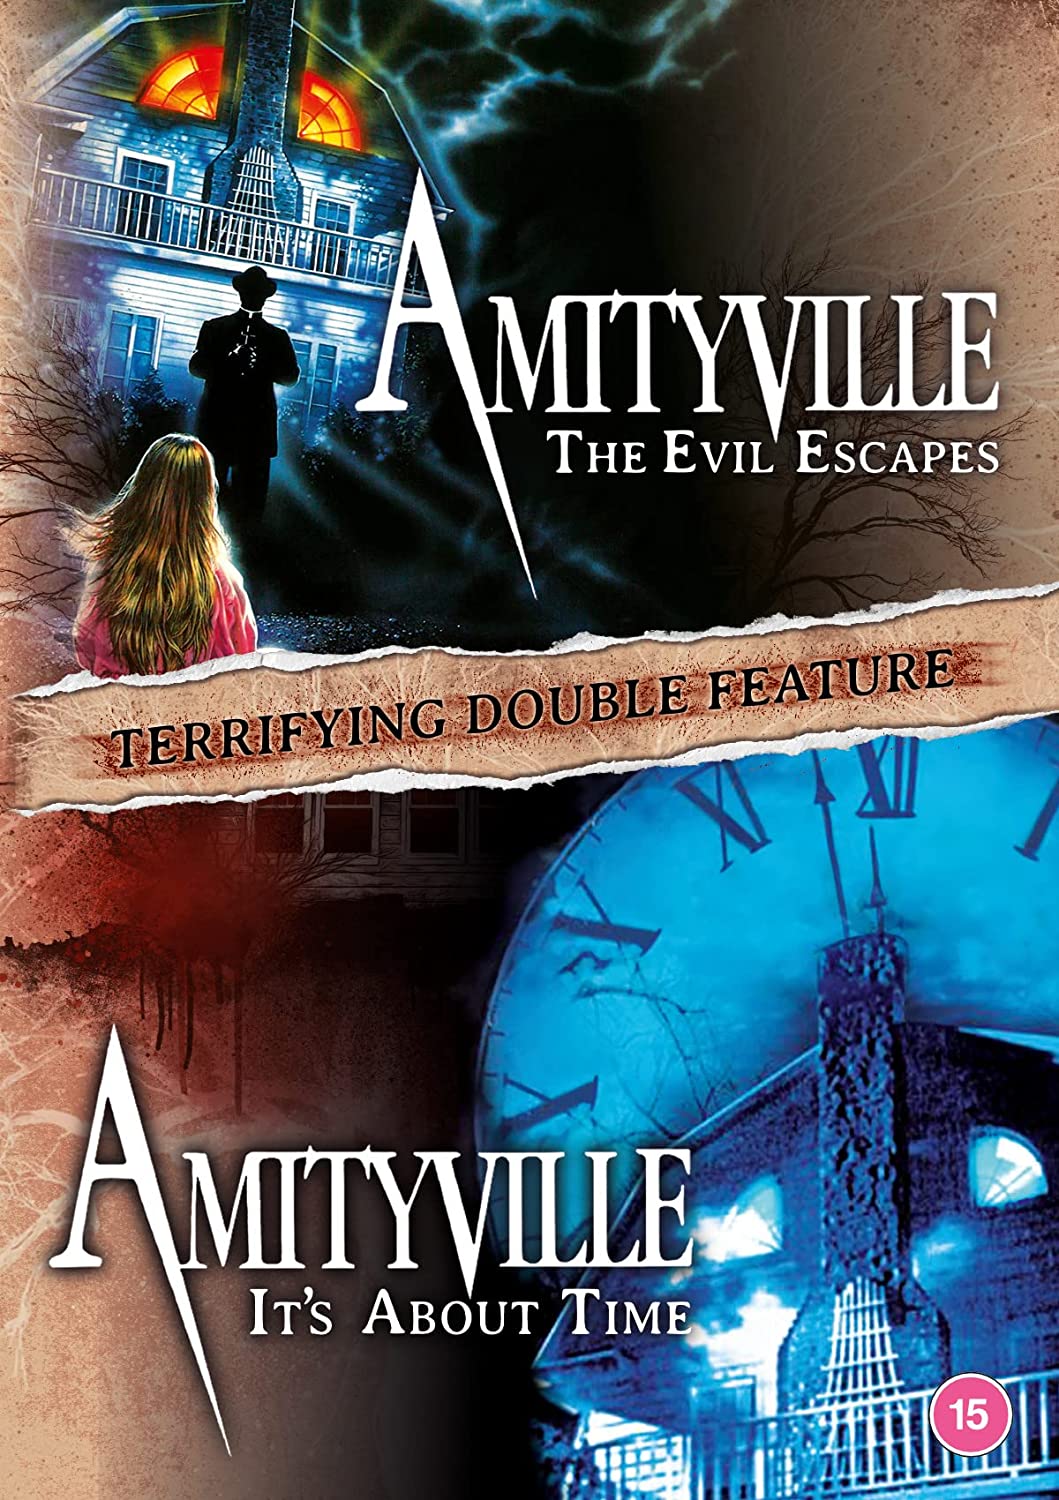 Amityville Horror: The Evil Escapes / Amityville 1992: It's About Time - Horror [DVD]